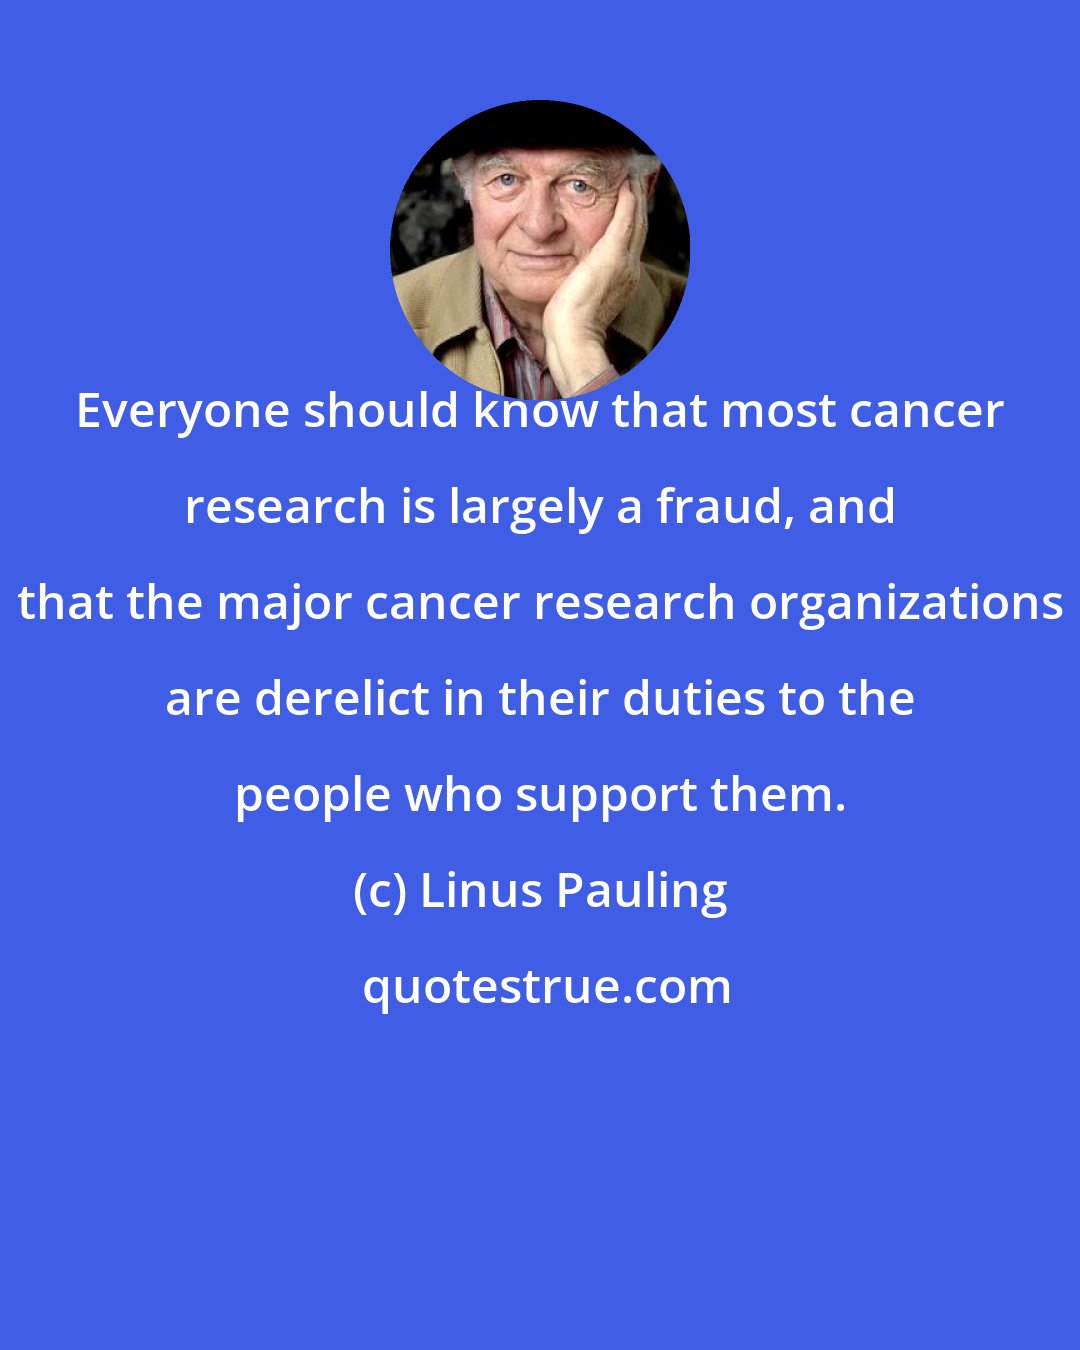 Linus Pauling: Everyone should know that most cancer research is largely a fraud, and that the major cancer research organizations are derelict in their duties to the people who support them.